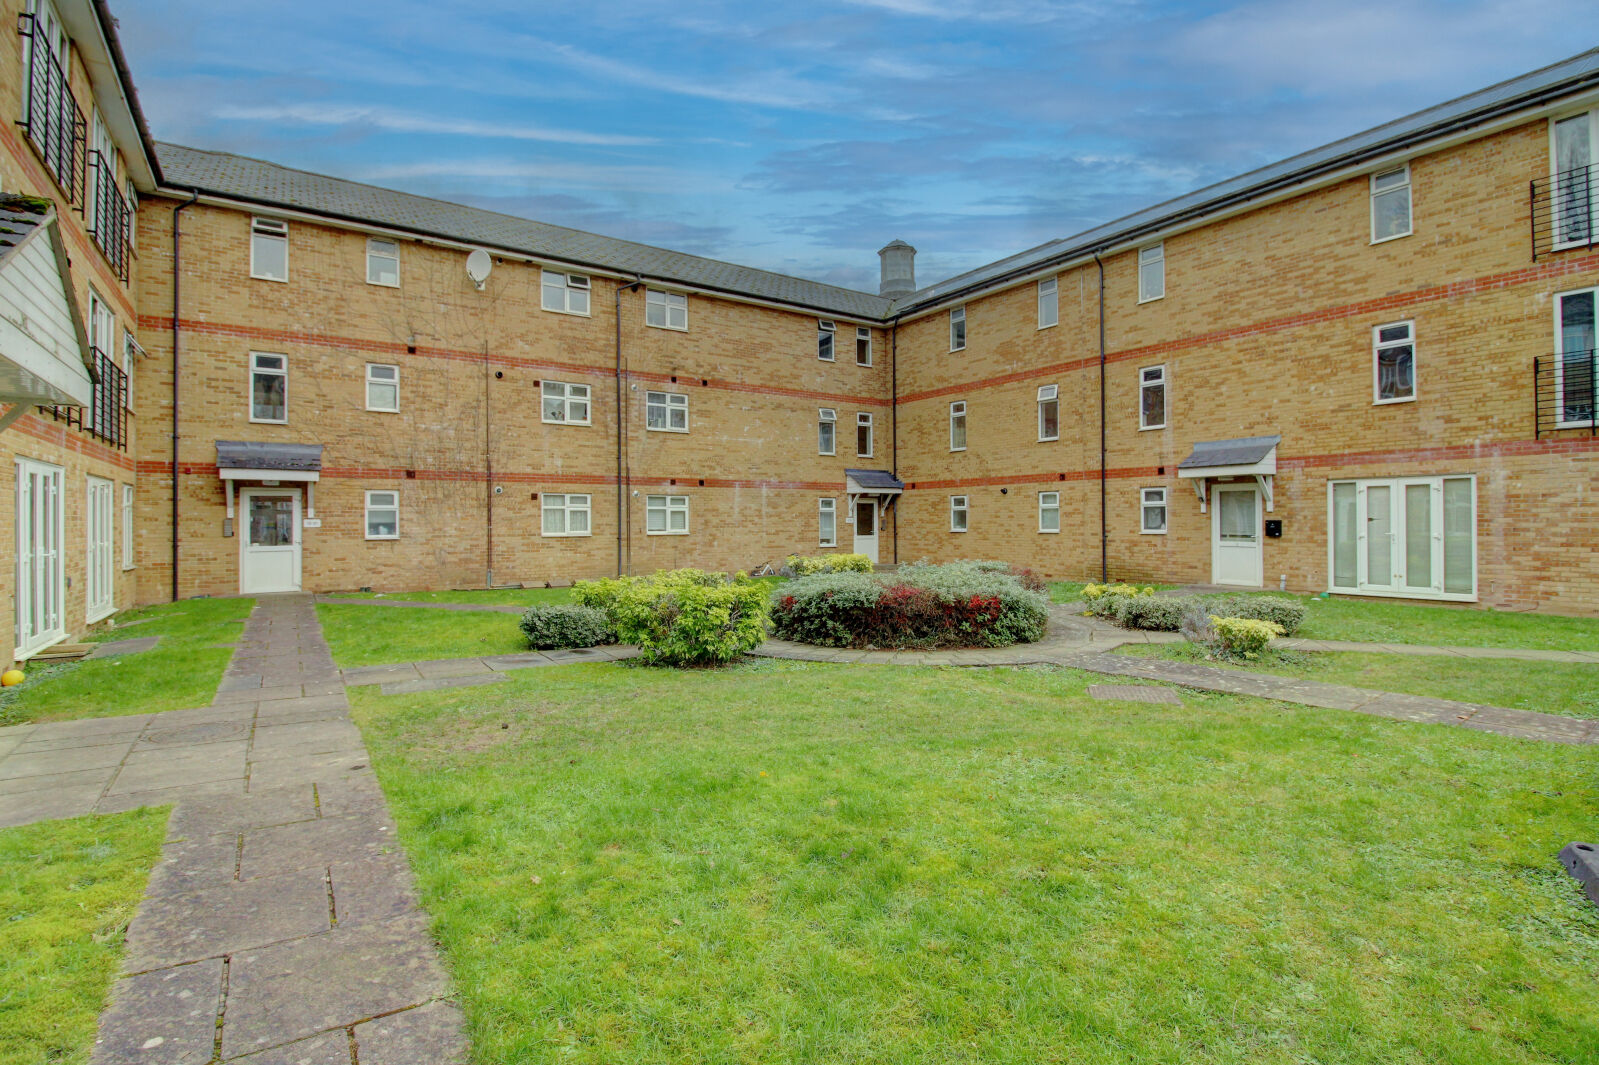 1 bedroom  flat for sale Temple End, High Wycombe, HP13, main image